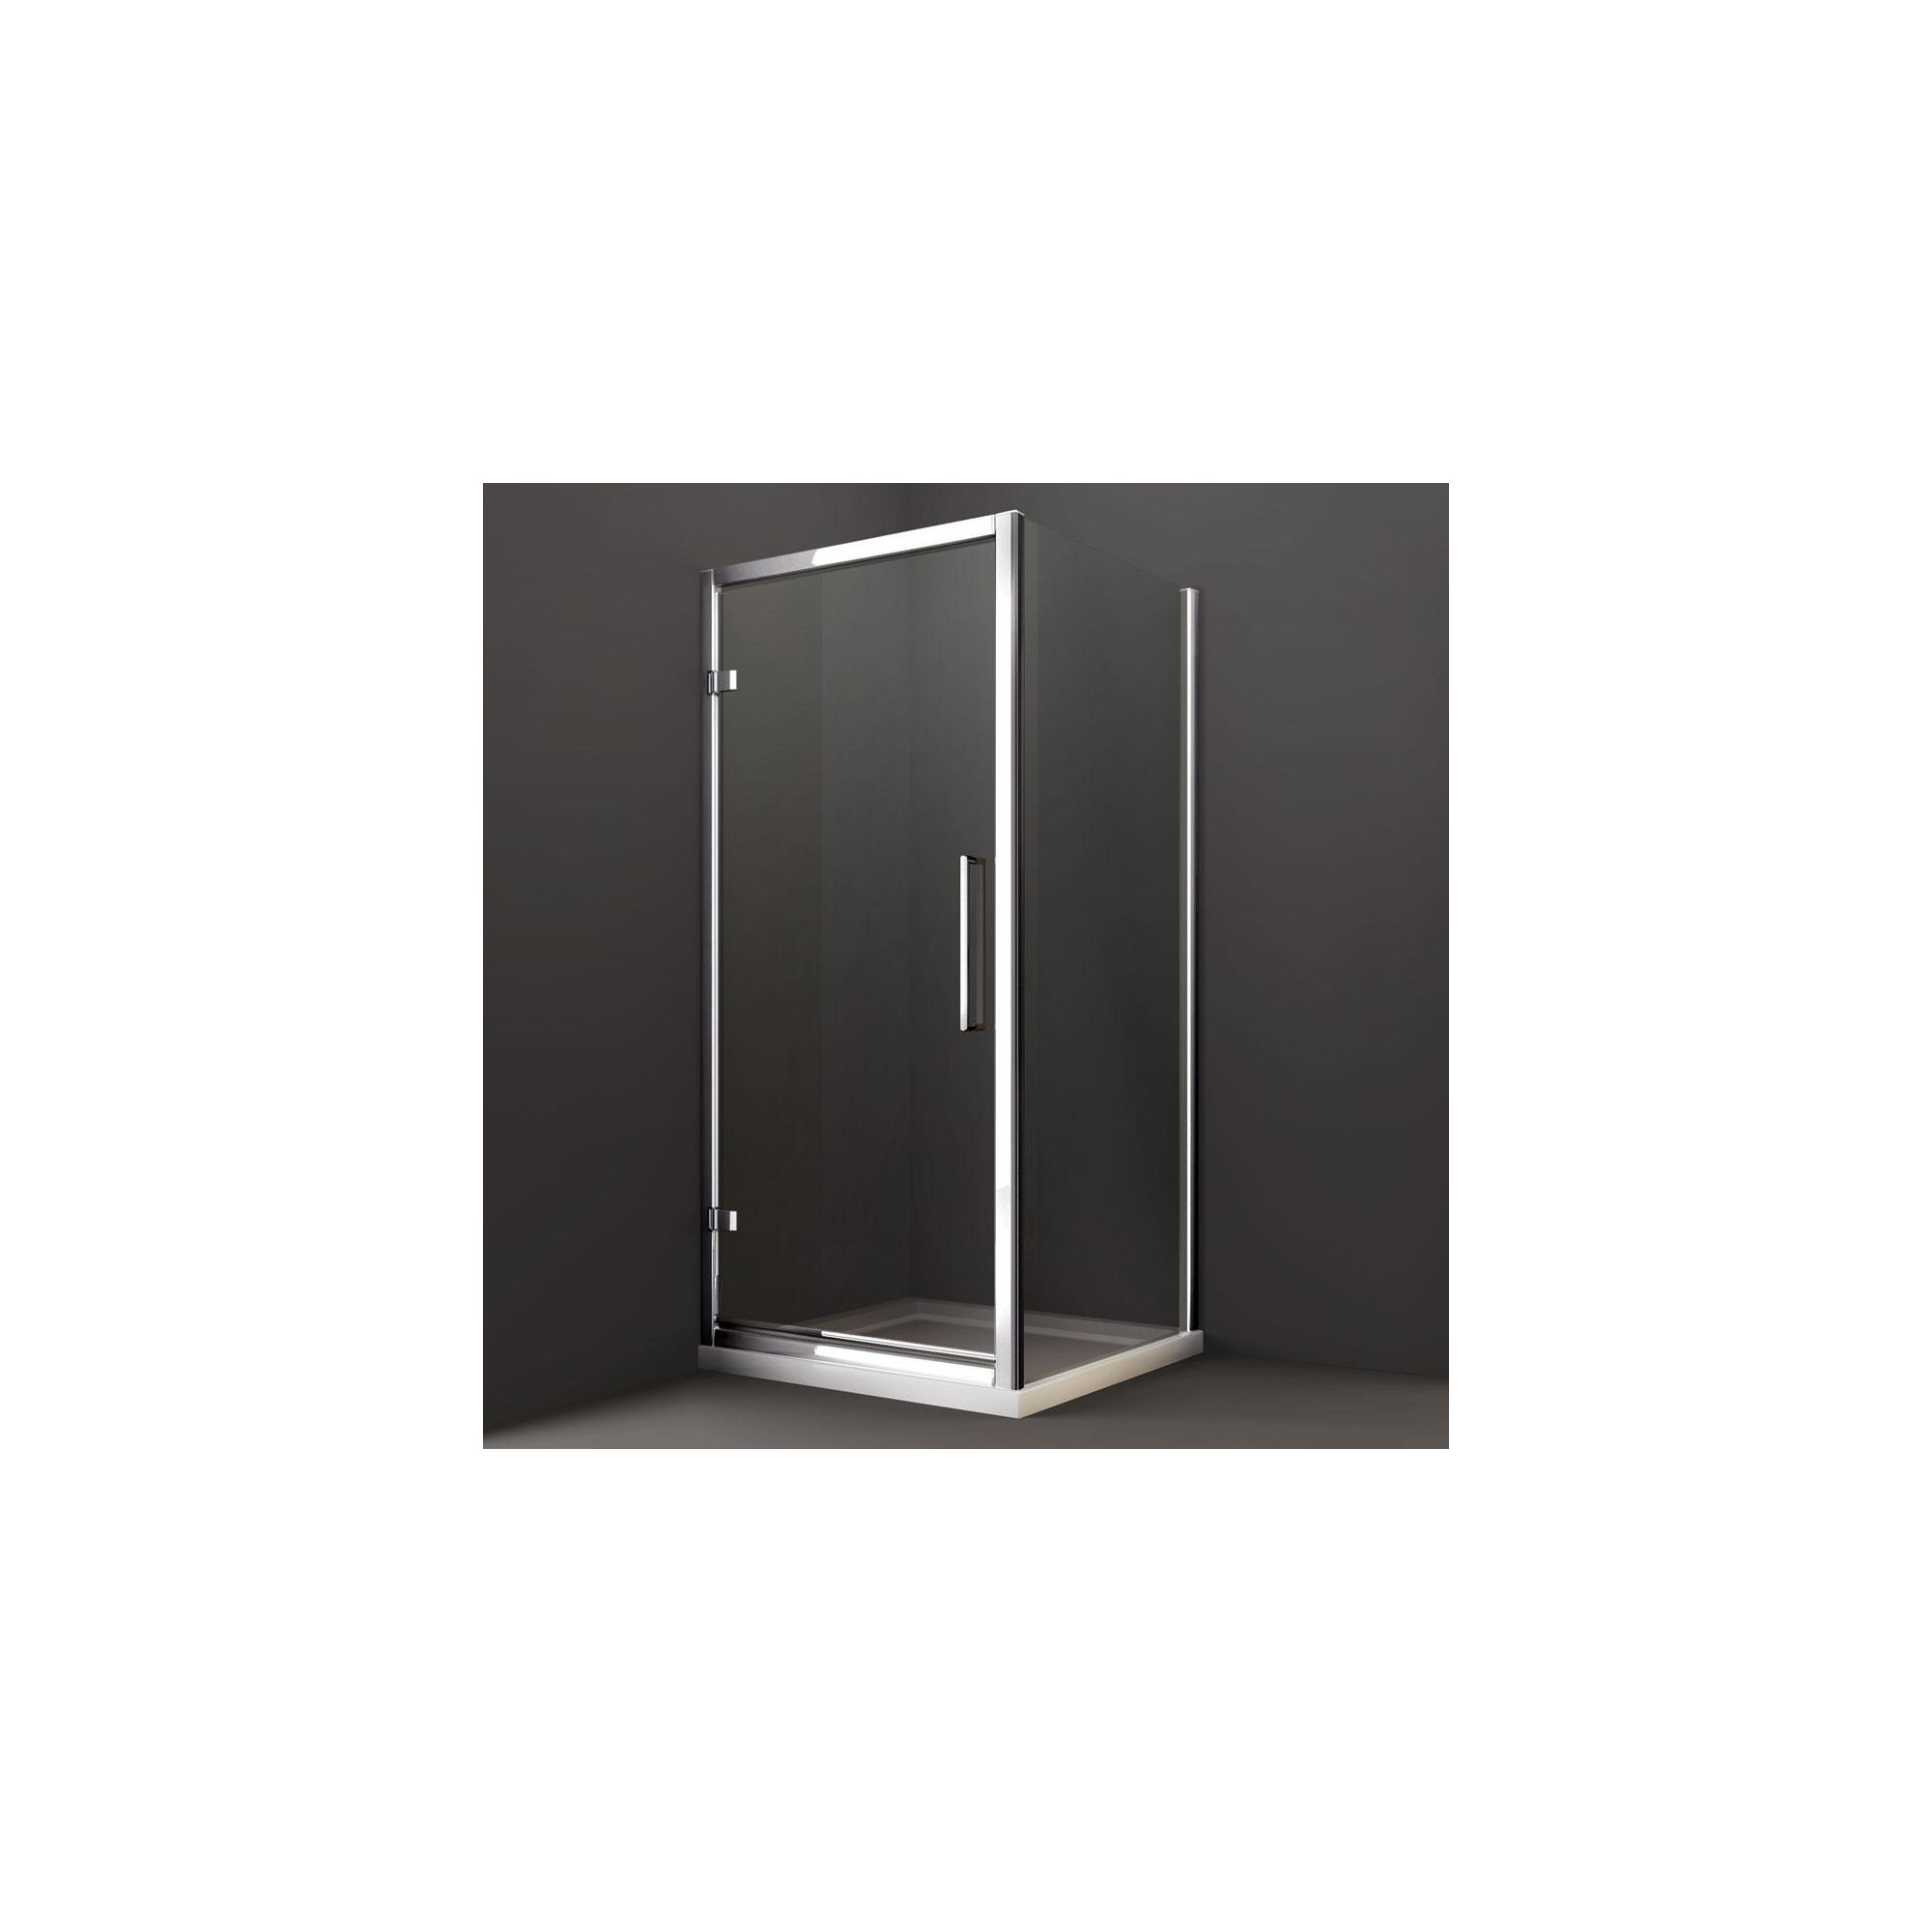 Merlyn Series 8 Hinged Shower Door, 700mm Wide, Chrome Frame, 8mm Glass at Tesco Direct